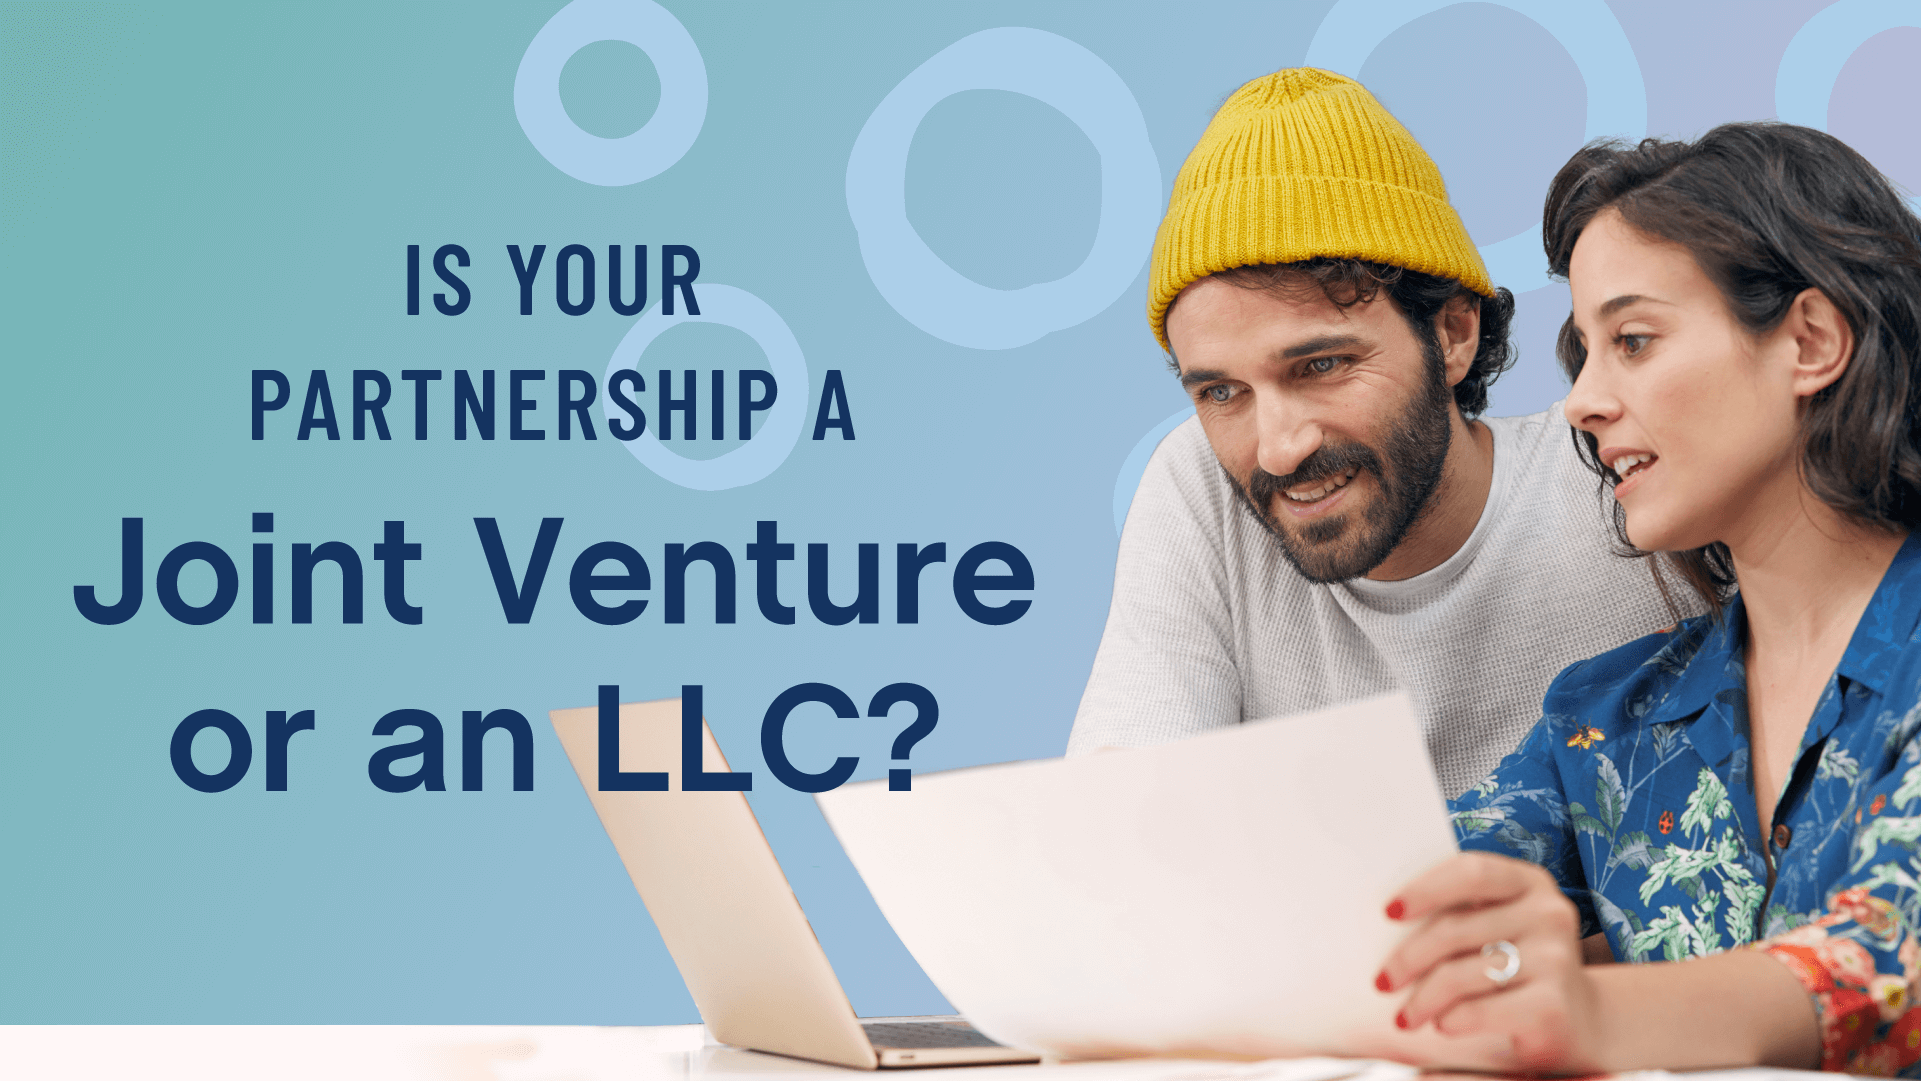 Is Your Partnership a Joint Venture or an LLC?